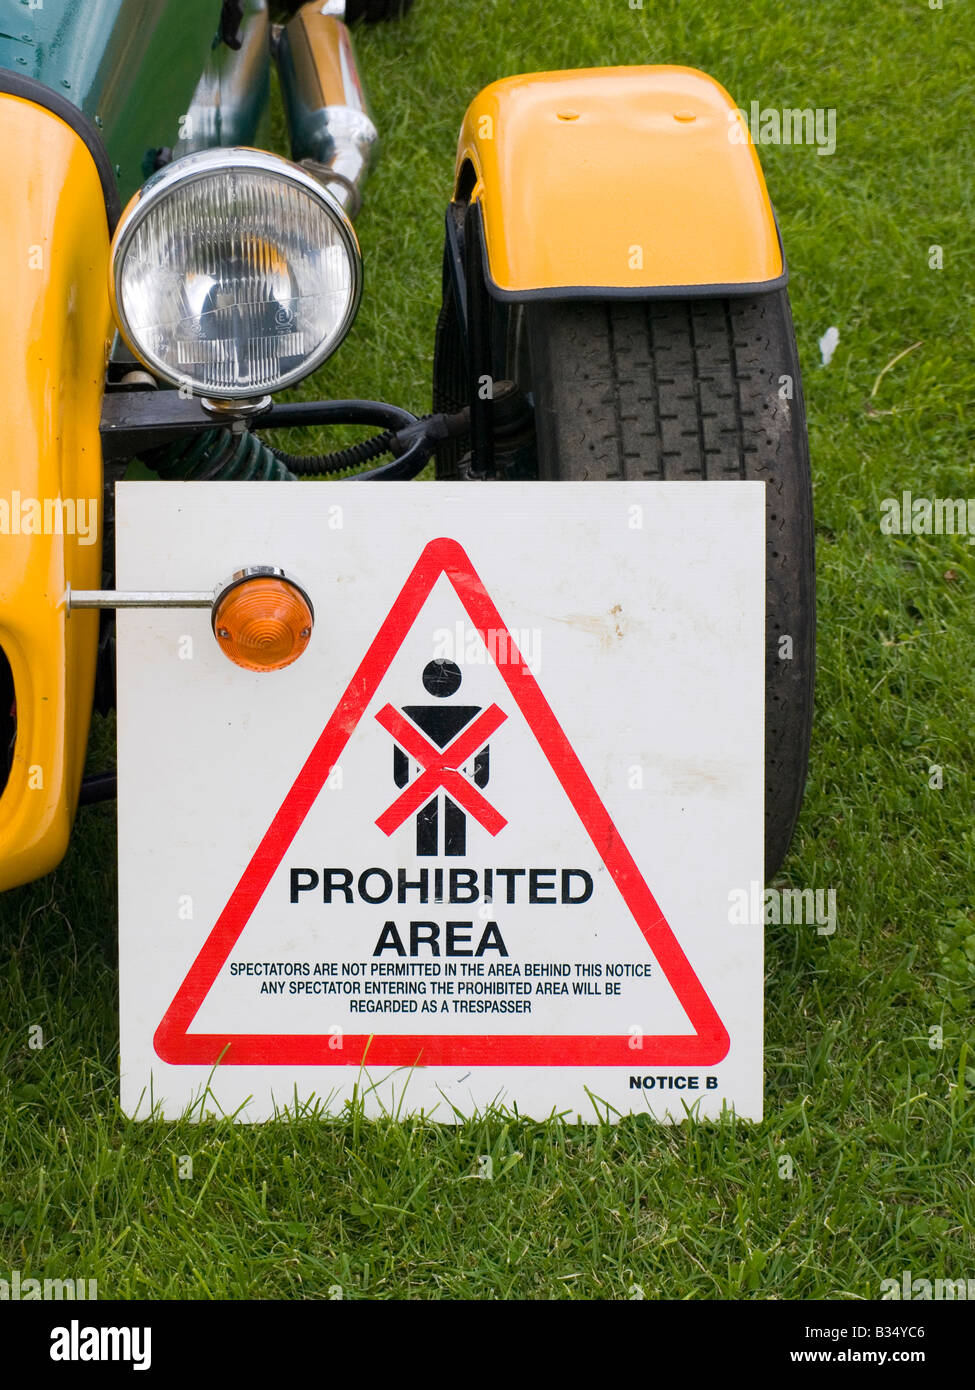 A Spectators Prohibited notice used in motor sport against the front wheel of a yellow Caterham 7 sports car Stock Photo